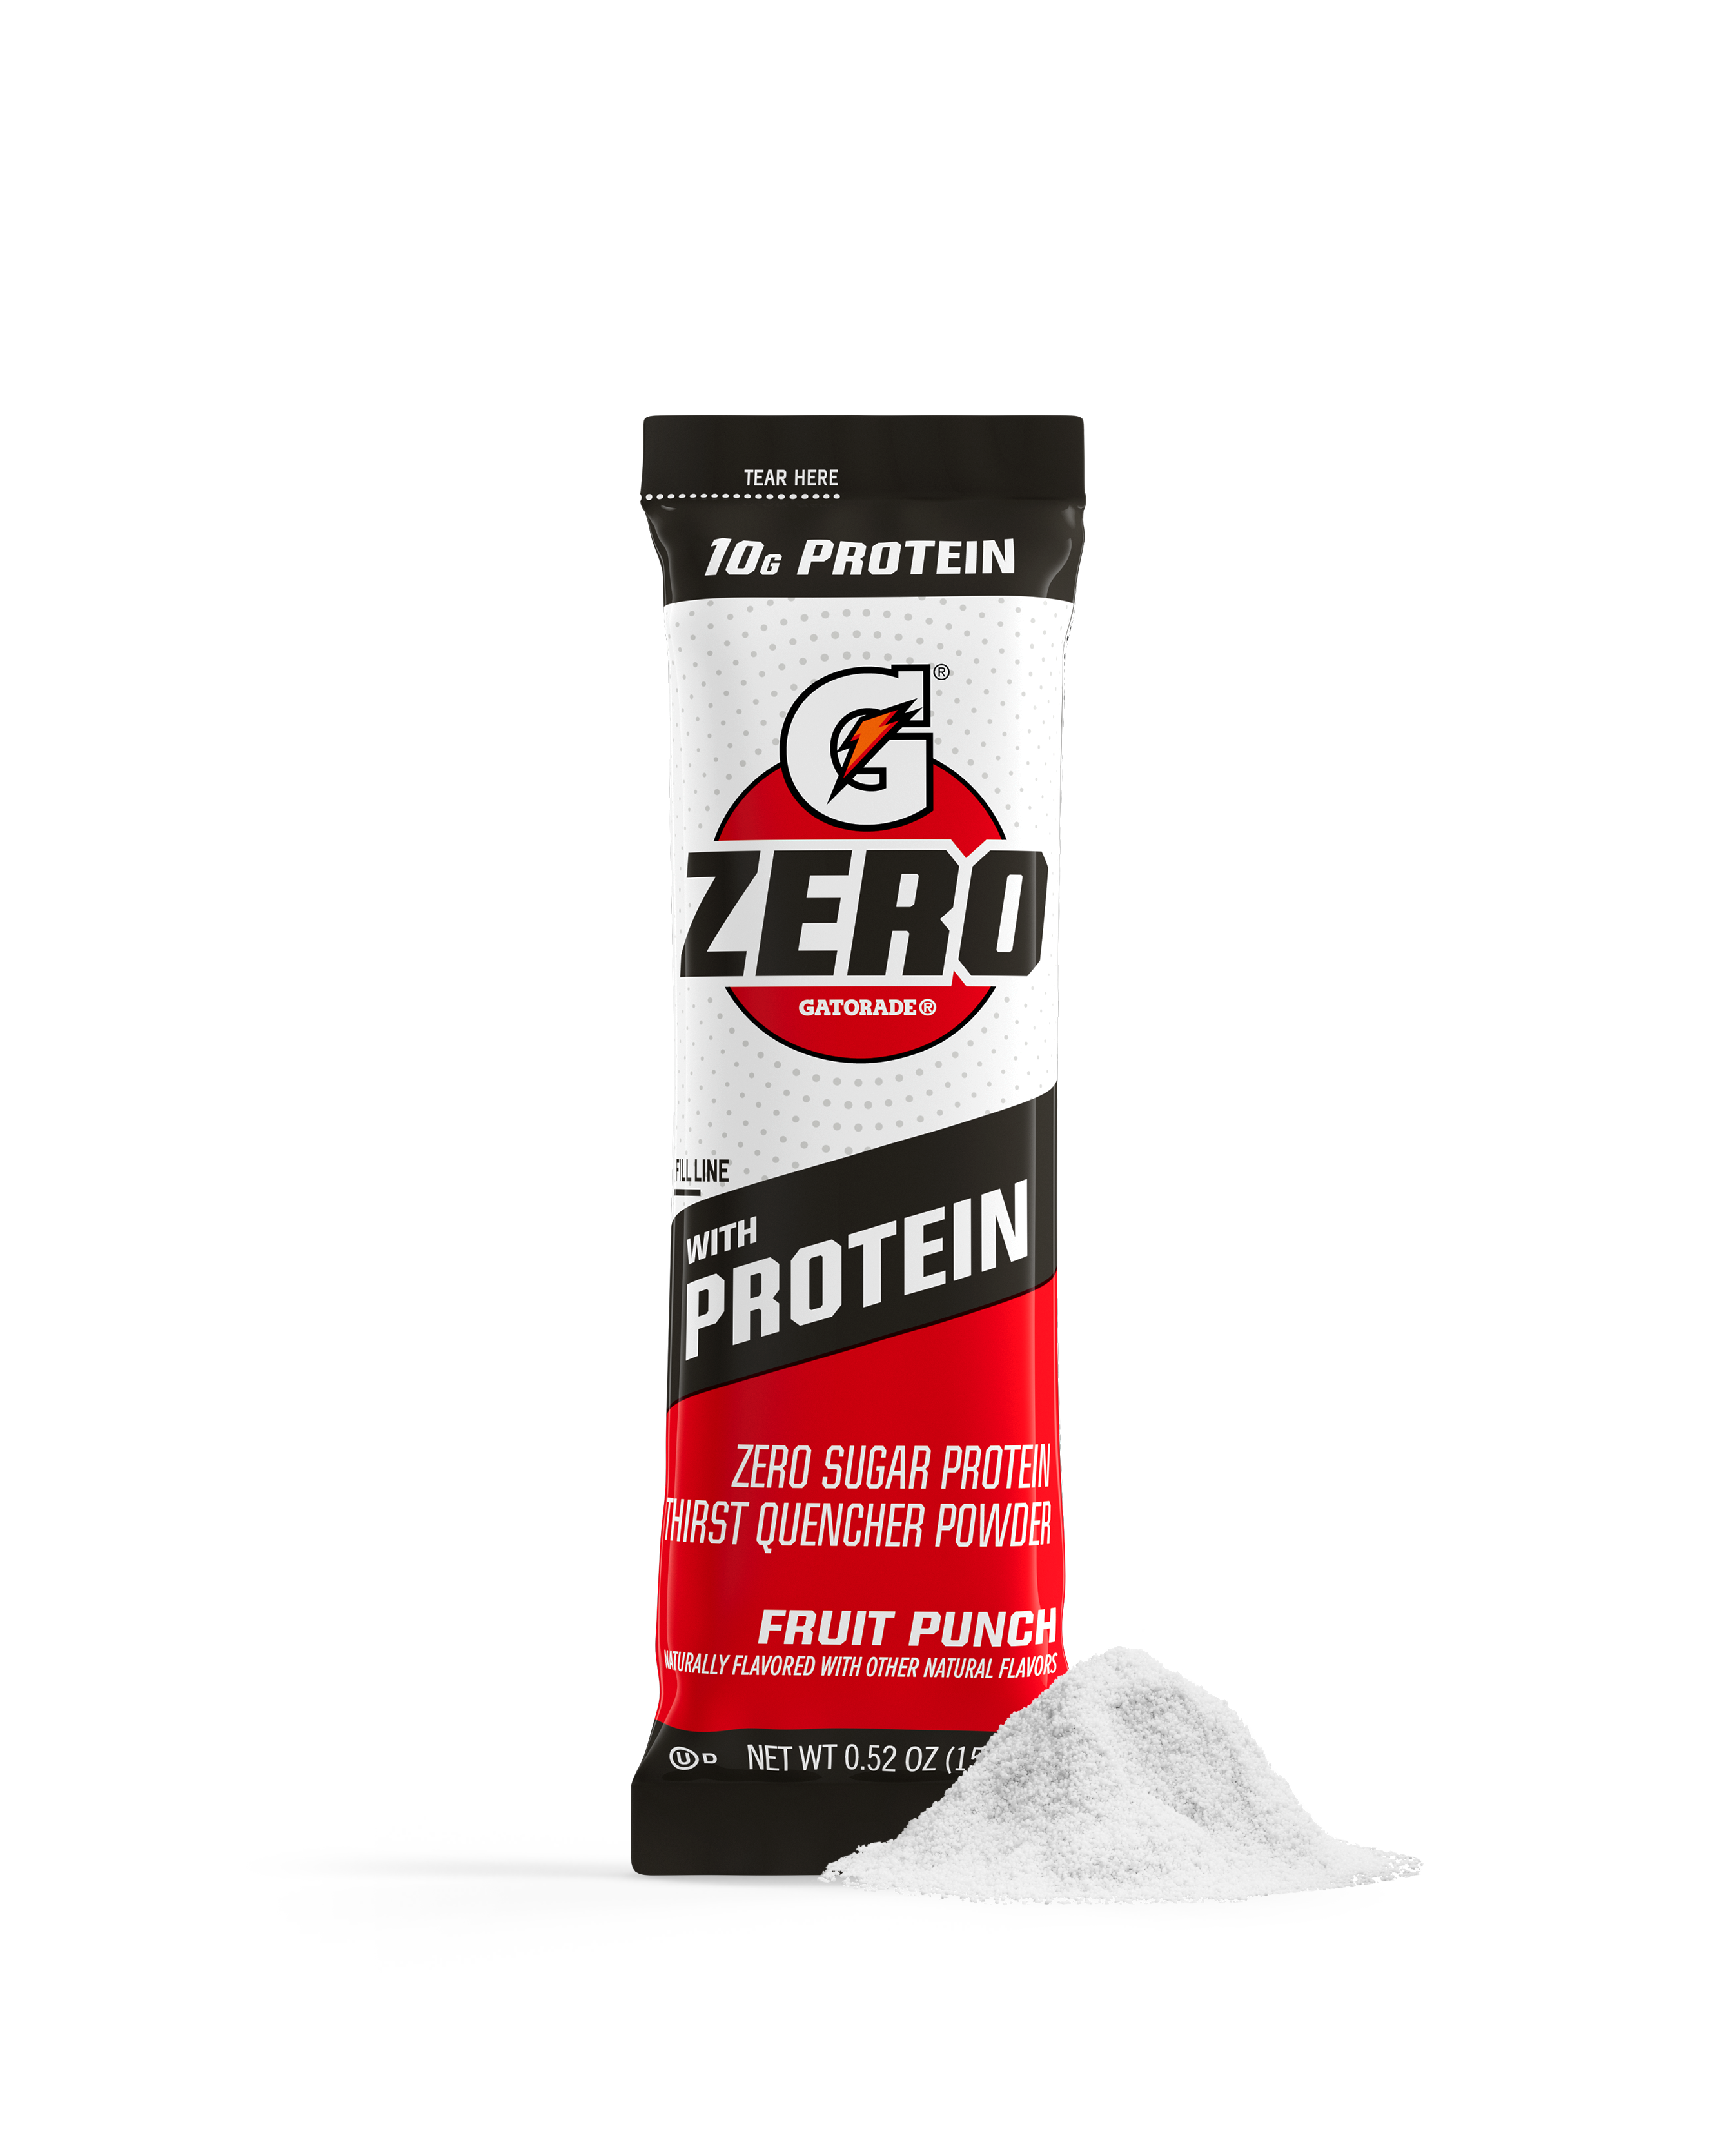 Gatorade Zero with Protein Fruit Punch Product Tile